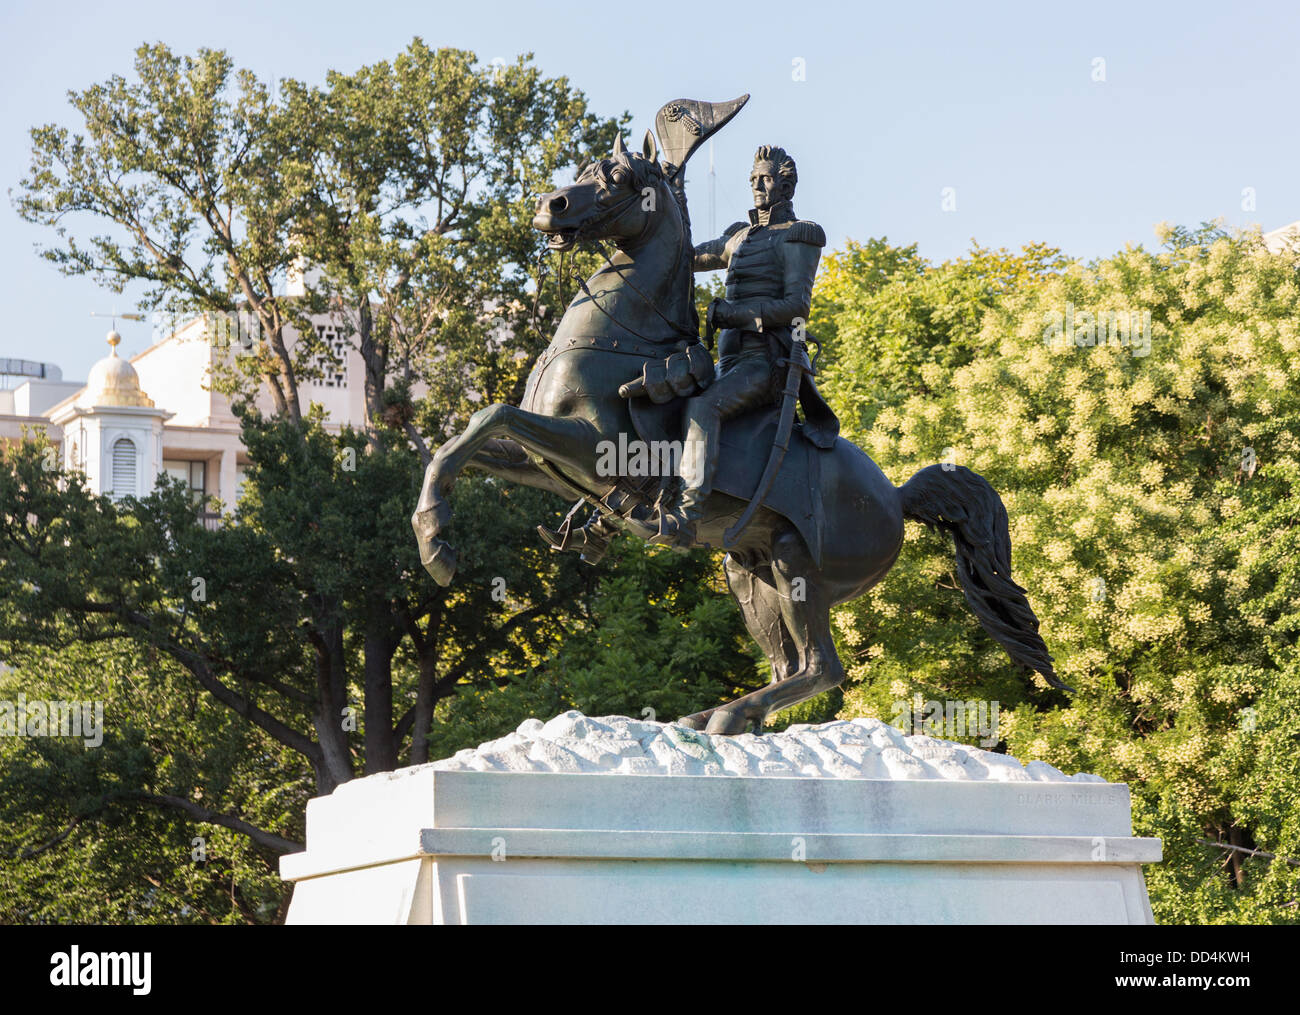 A statue of Andrew Jackson at Battle of New Orleans, Lafayette Square, Washington DC. Stock Photo